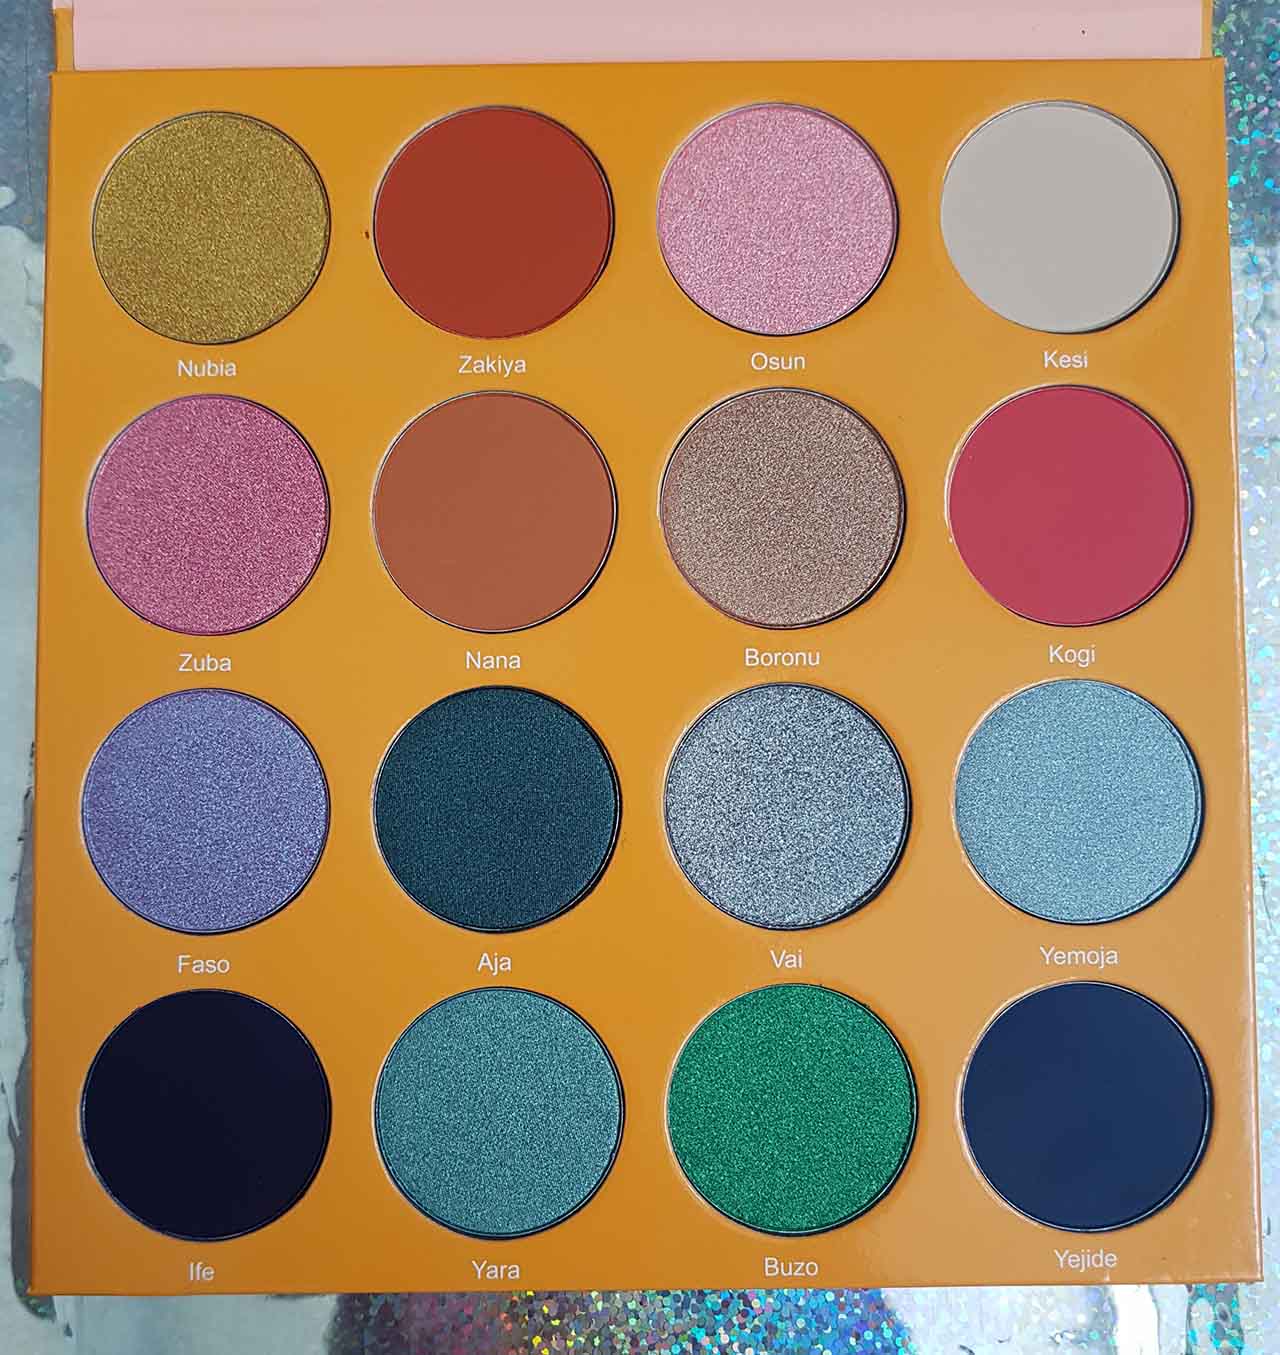 Juvia’s Place Magic Palette: The Magic Palette was inspired by the moon and sun goddesses and has been designed to allow your makeup to transition from day to night. It contains 16 different coloured eyeshadows.